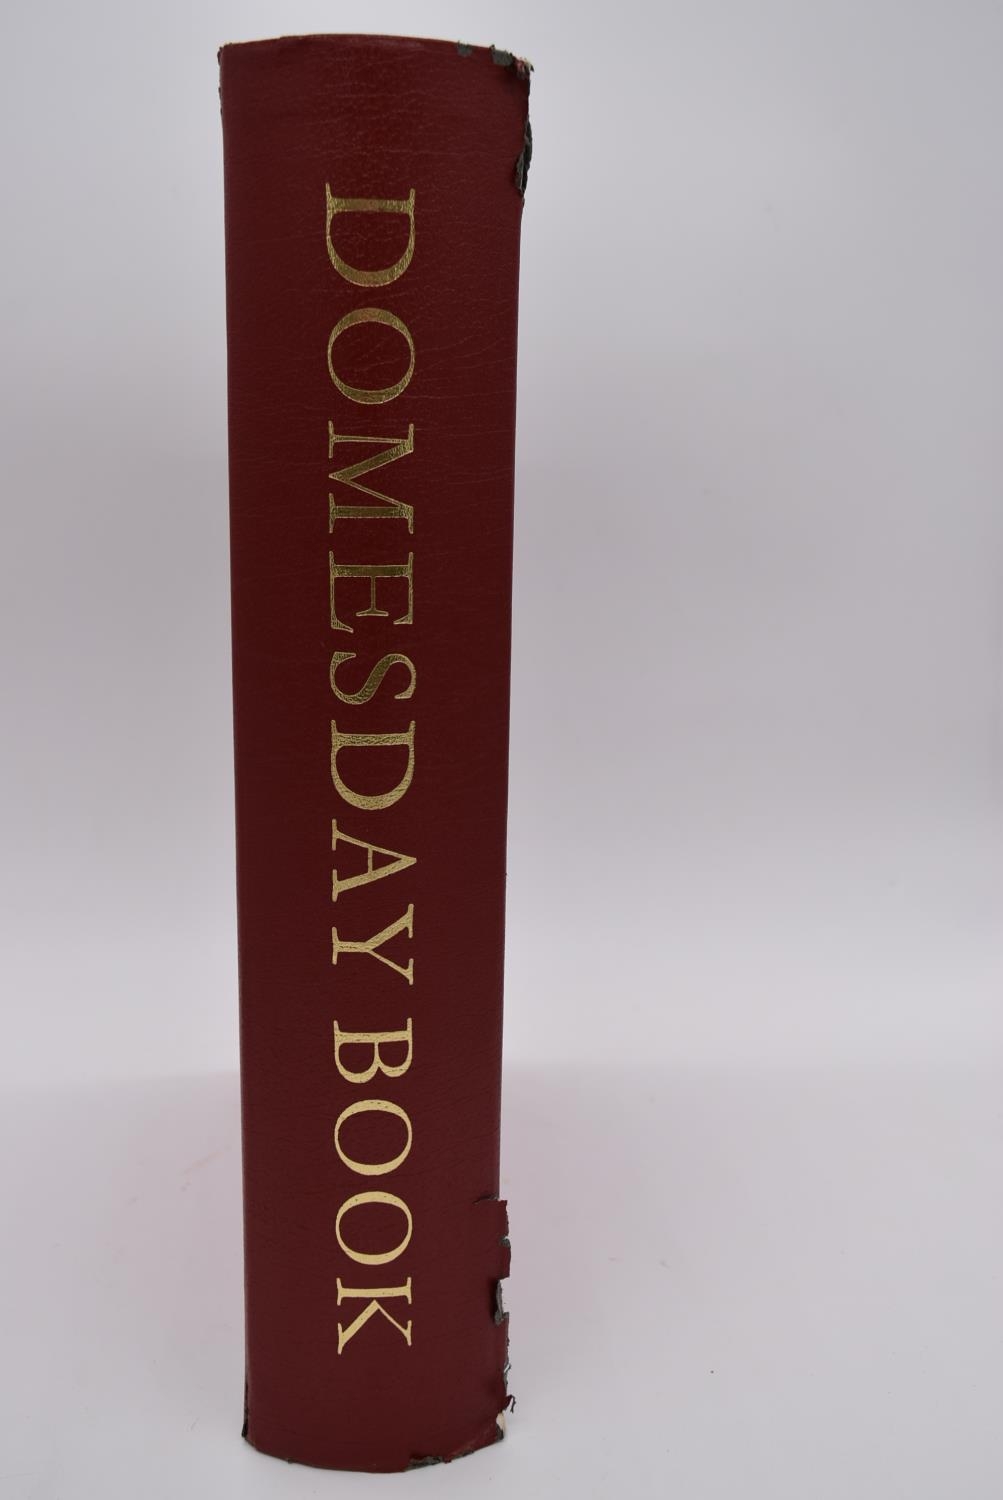 A contemporary limited edition 354 / 1000 County Edition of The Domesday Book complete with box